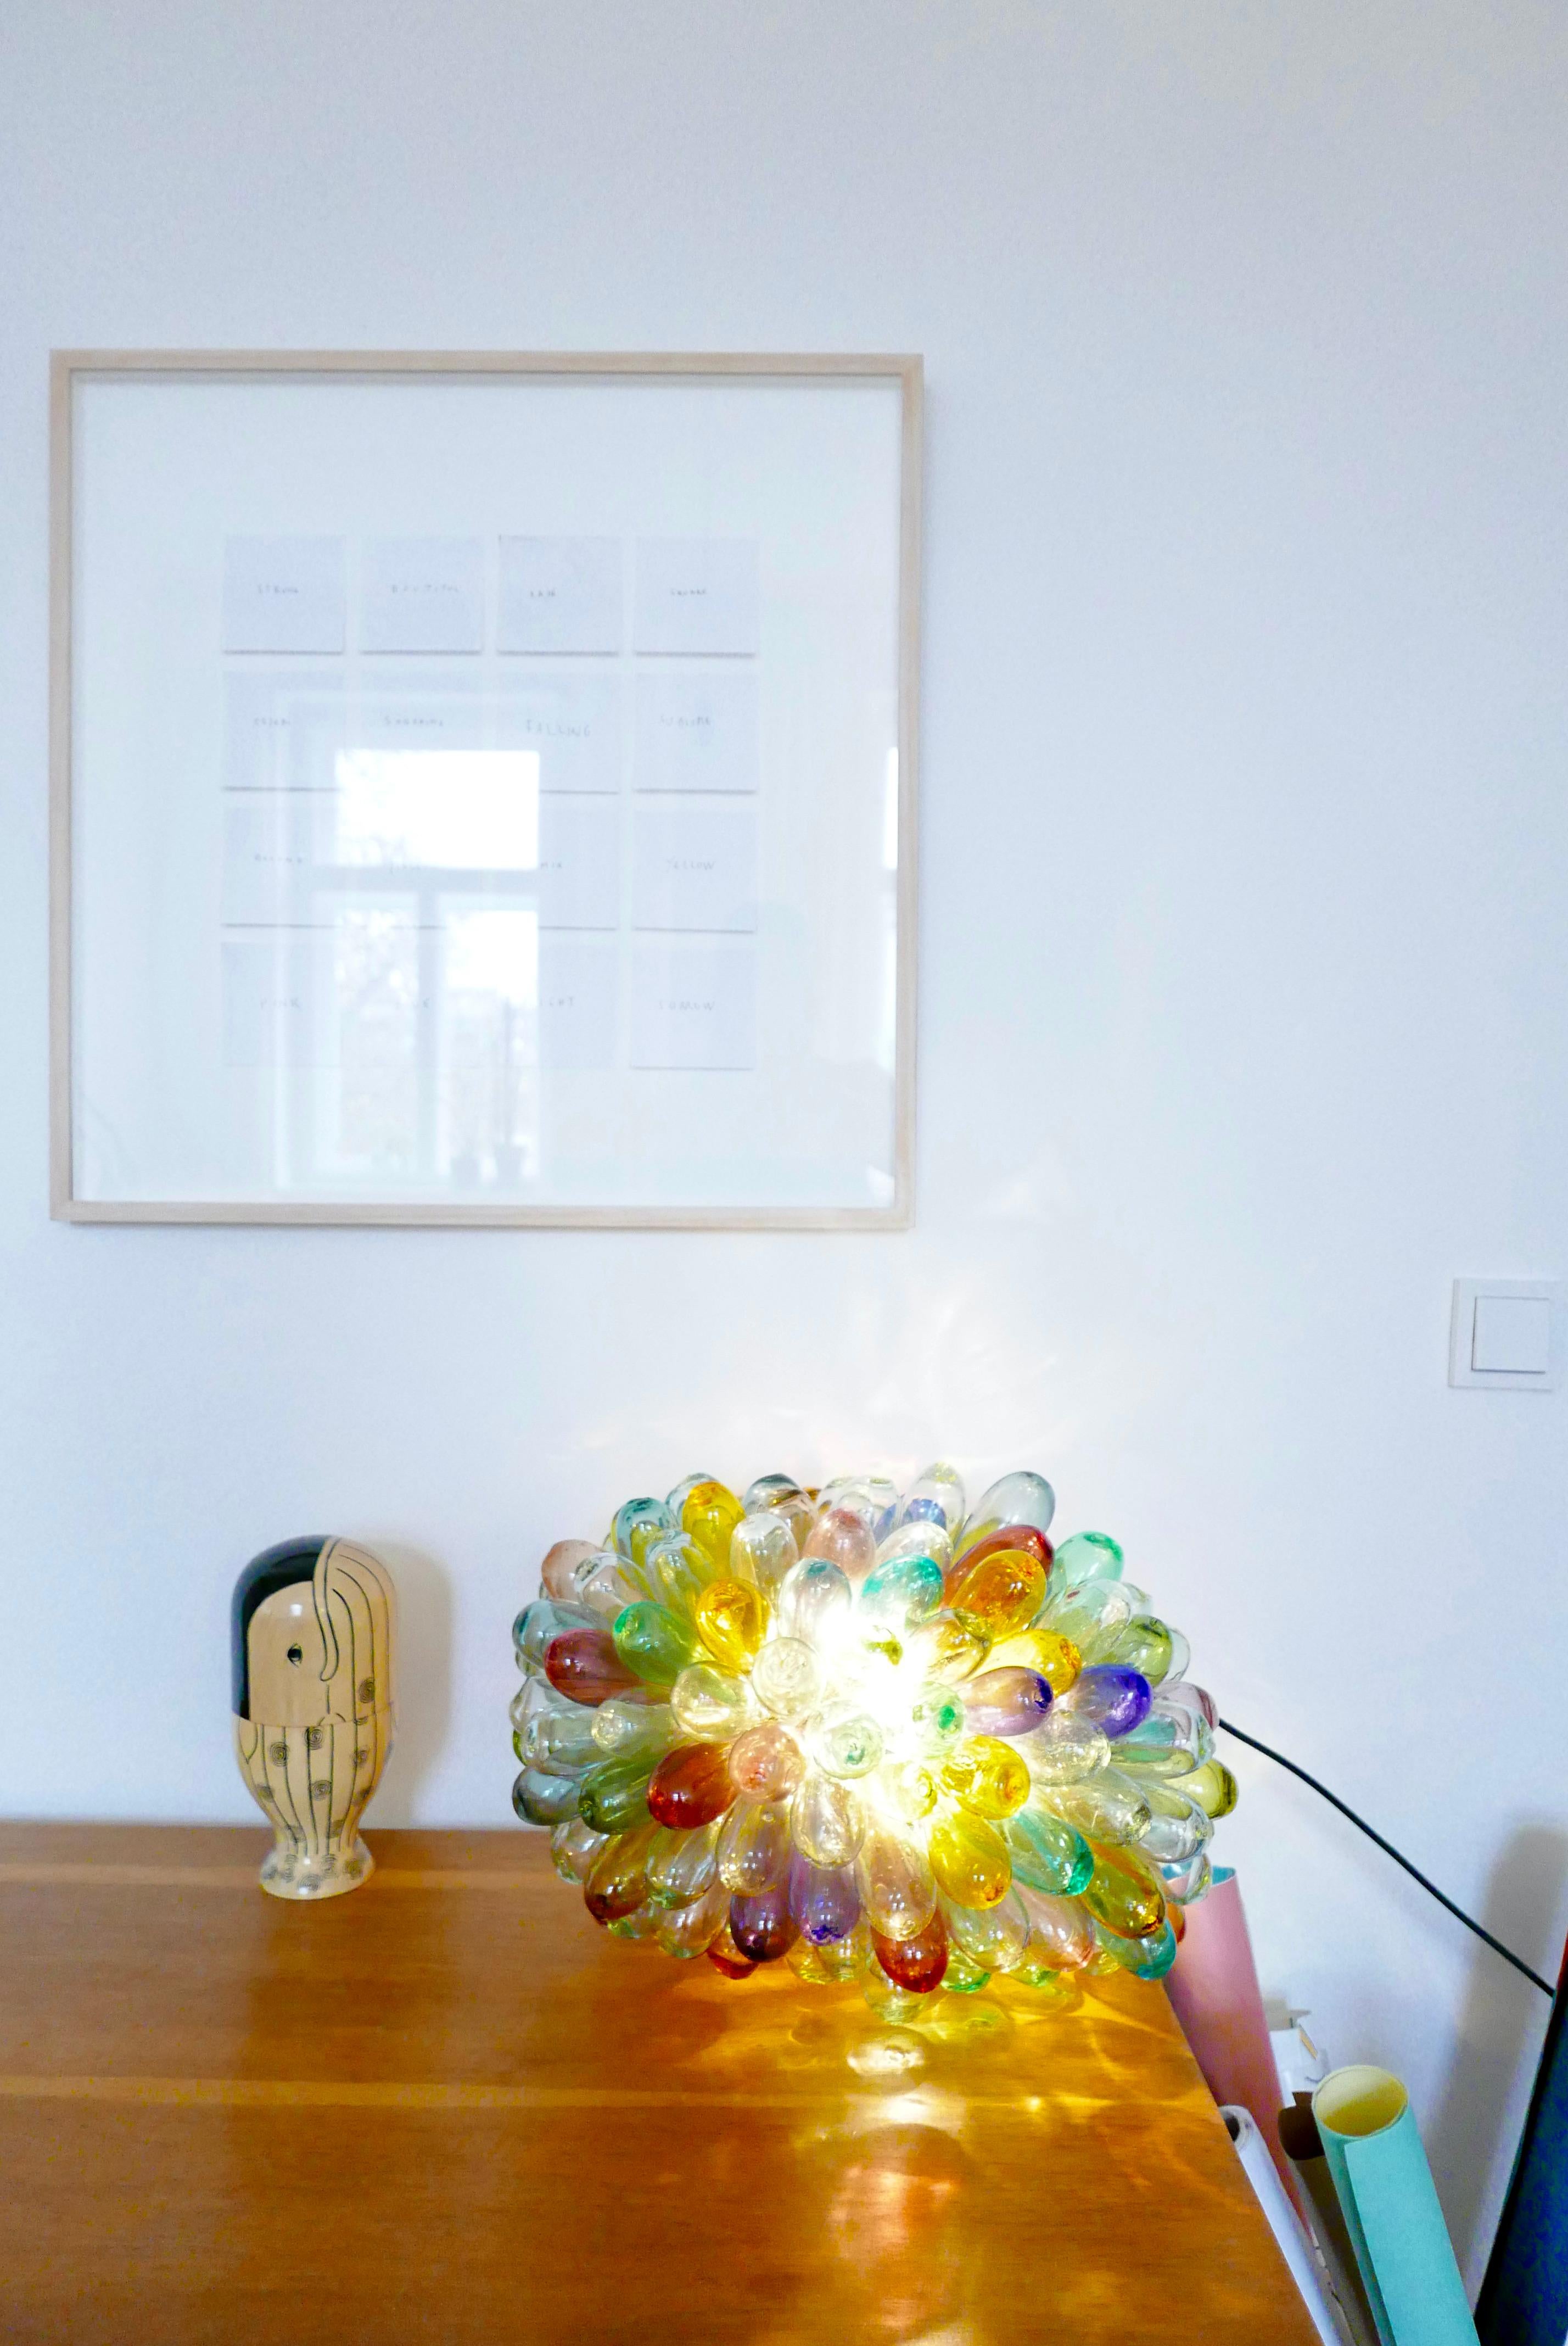 Space Age Tablelamp or Floorlamp from Mouthblown Glassdrops - Rainbow For Sale